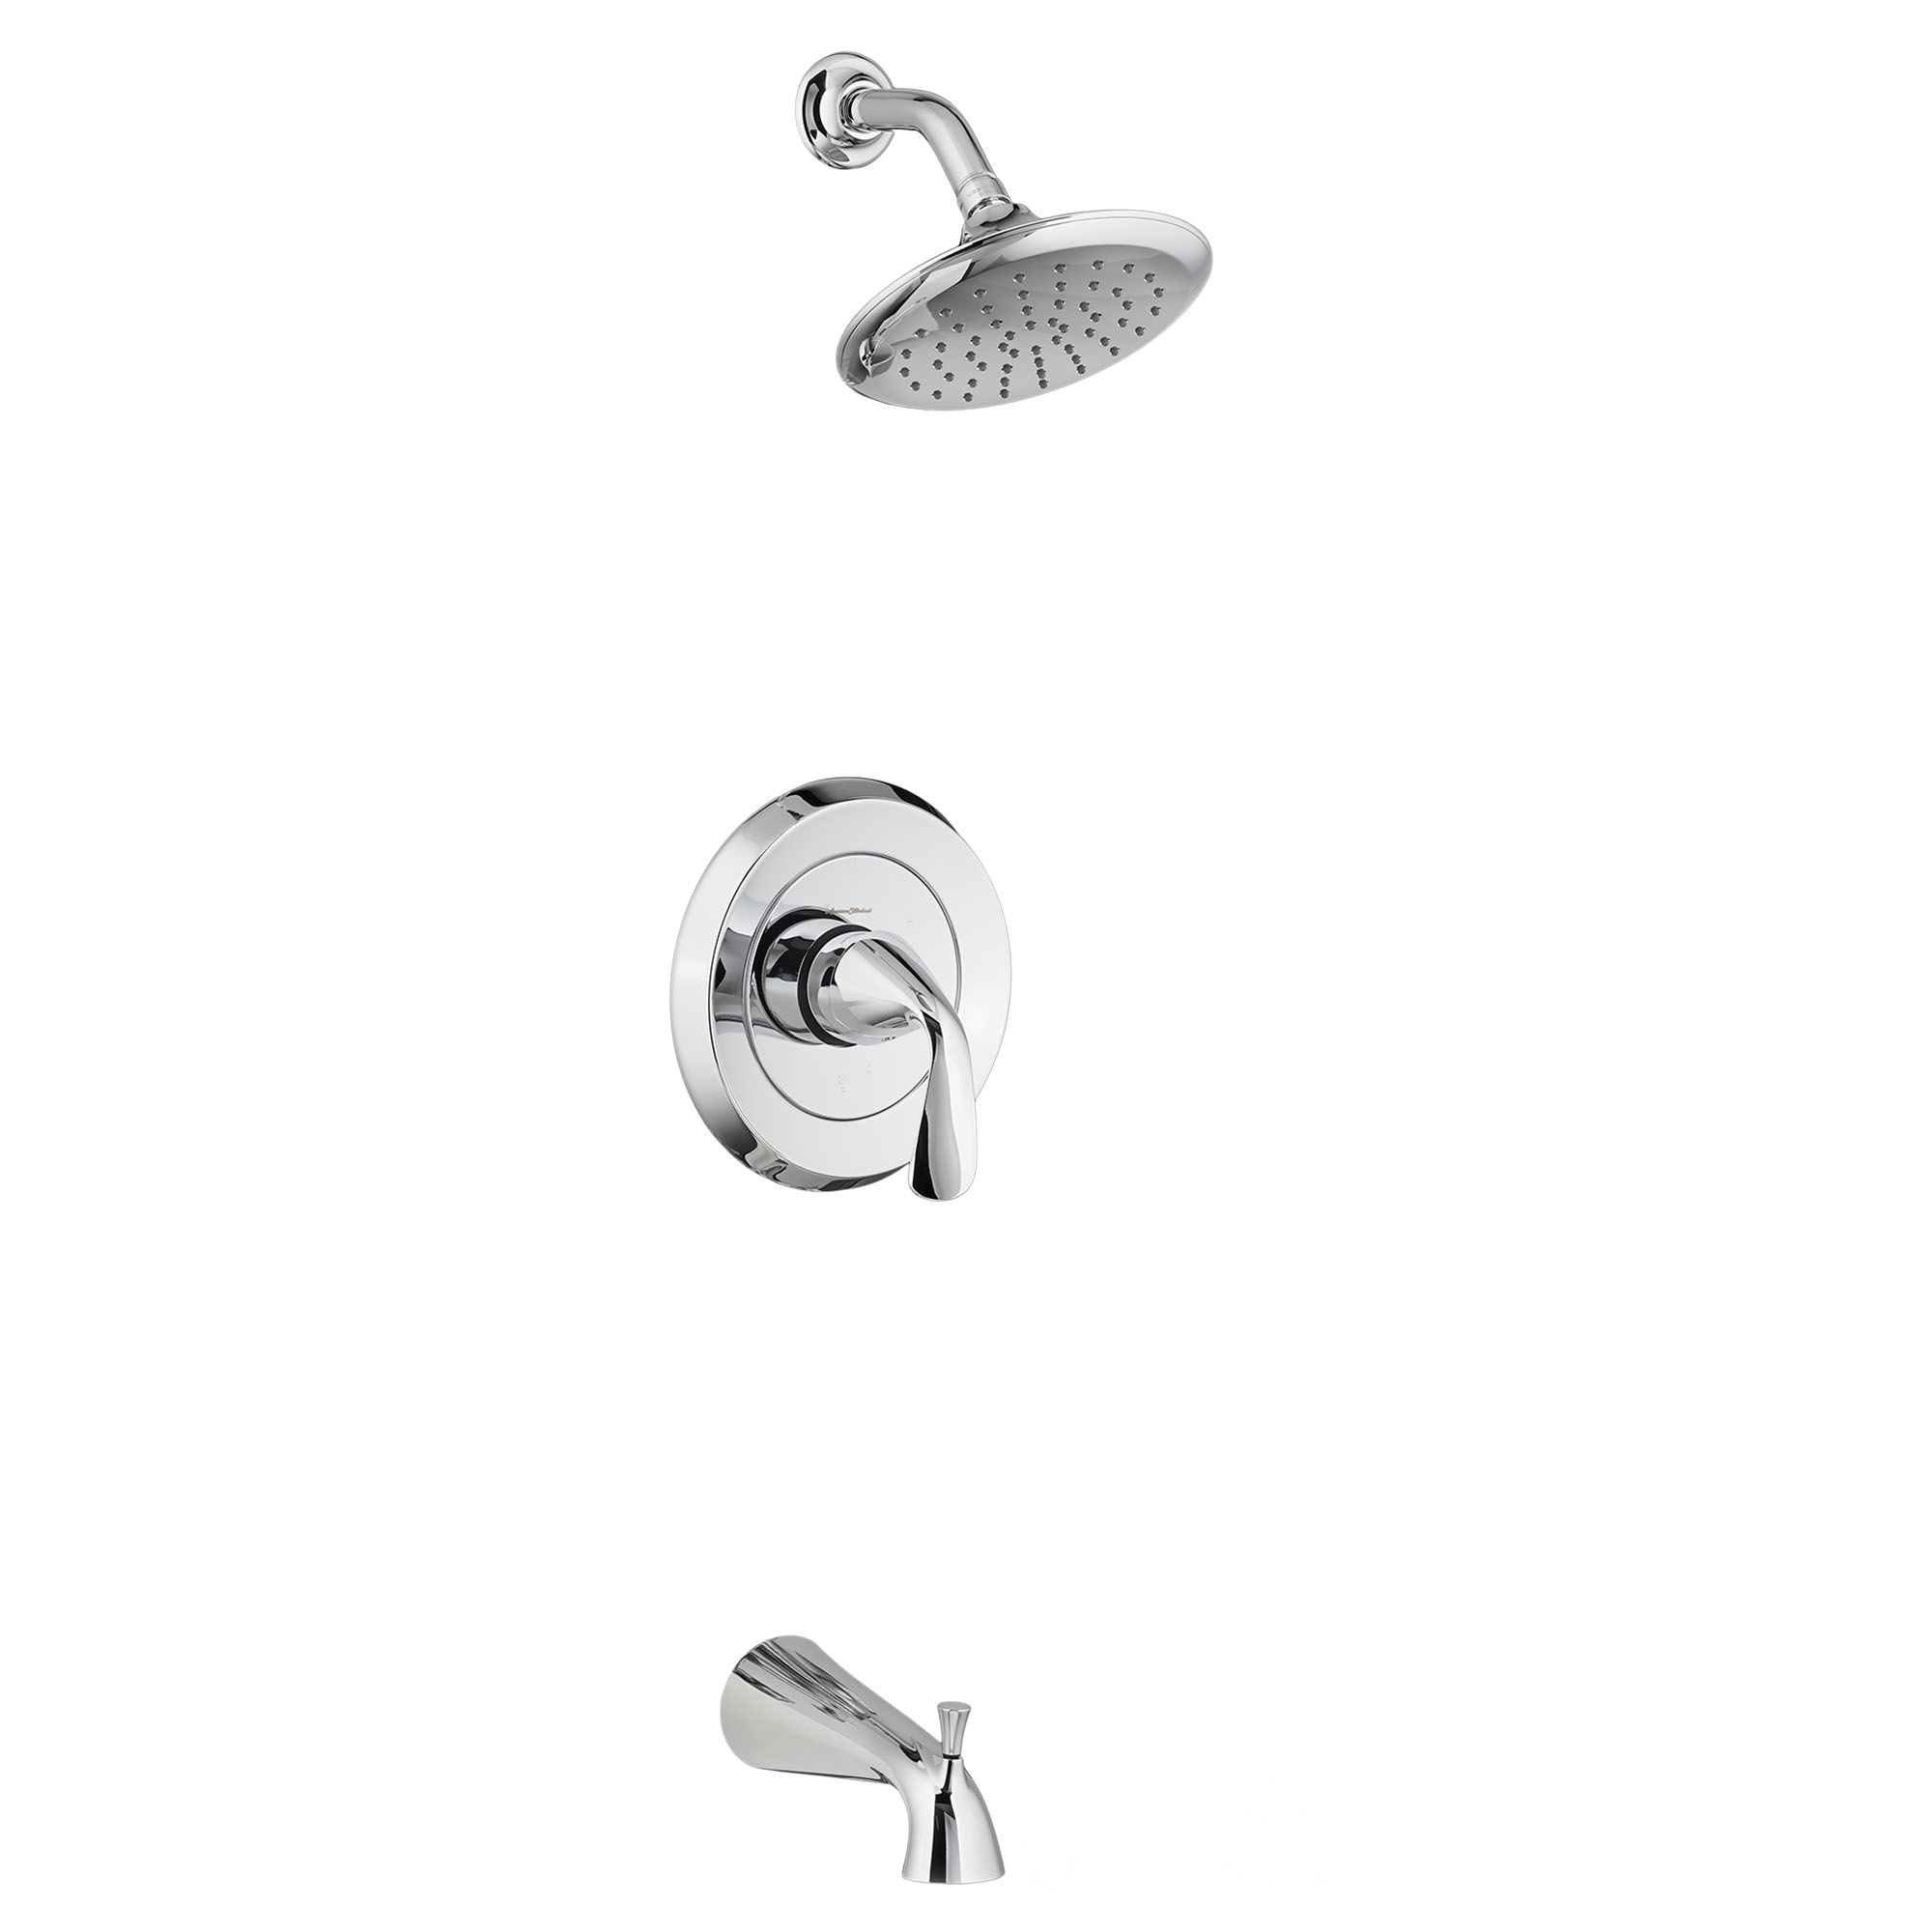 Fluent™ 2.5 gpm/9.5 L/min Tub and Shower Trim Kit With Showerhead, Double Ceramic Pressure Balance Cartridge With Lever Handle